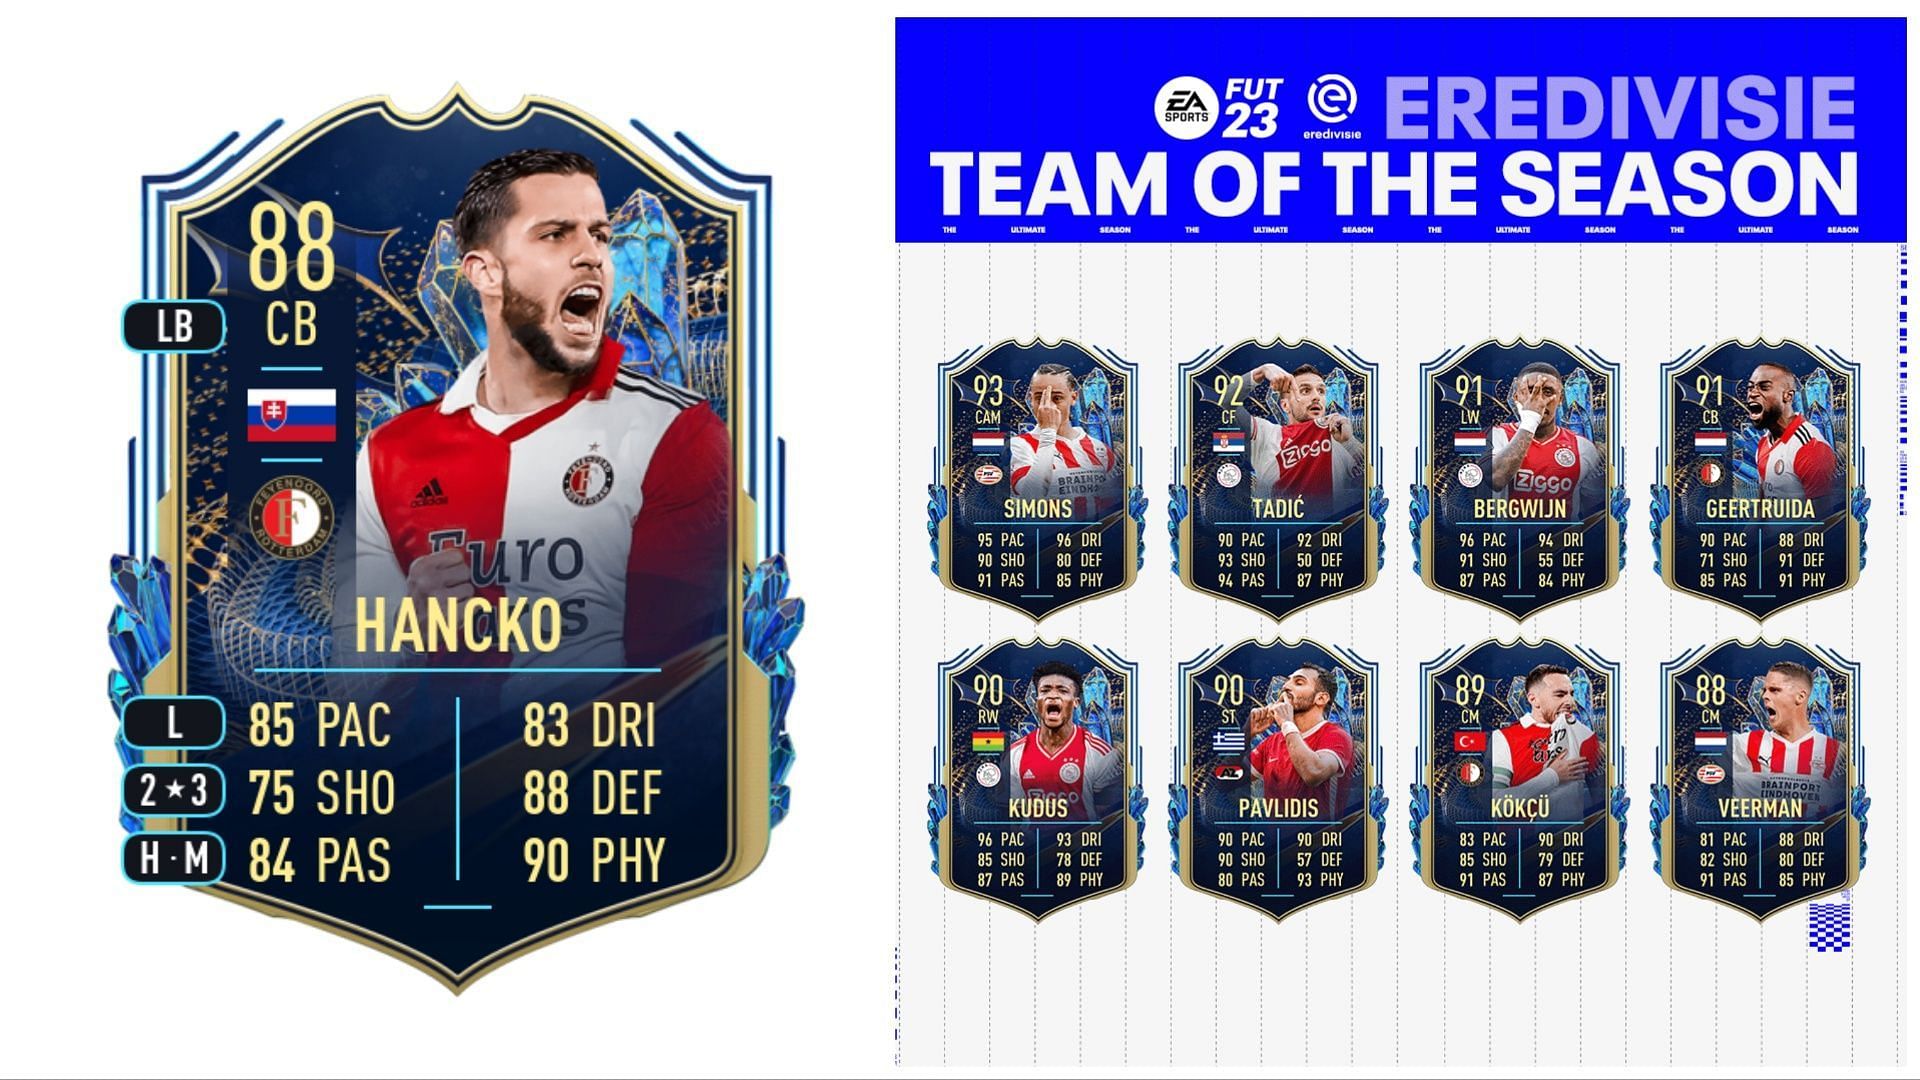 TOTS Hancko objective is now live in FIFA 23 (Images via EA Sports)